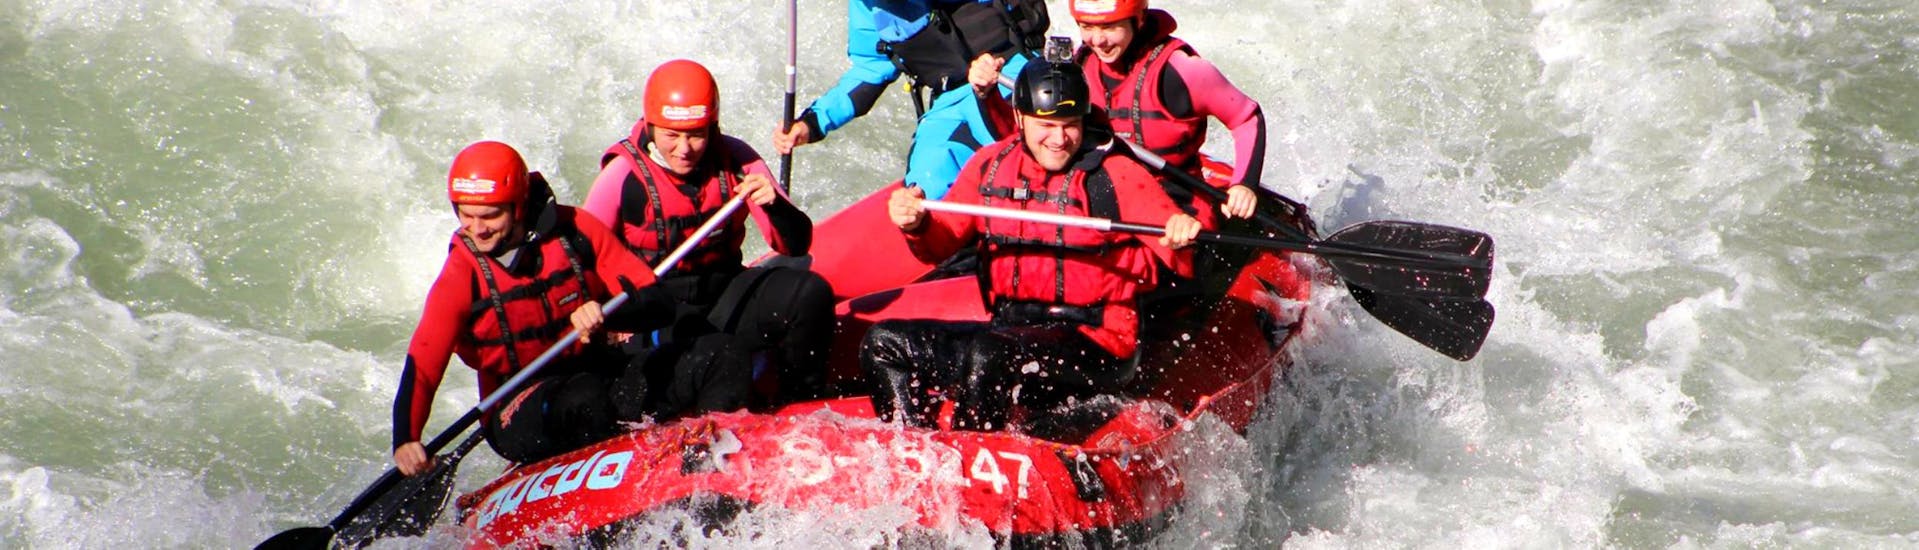 The participants of the Rafting Tour "Wild Water" are conquering the high waves an rapids of Salzach river together with an experienced guide from Outdo Zell am See Rafting & Canyoning.